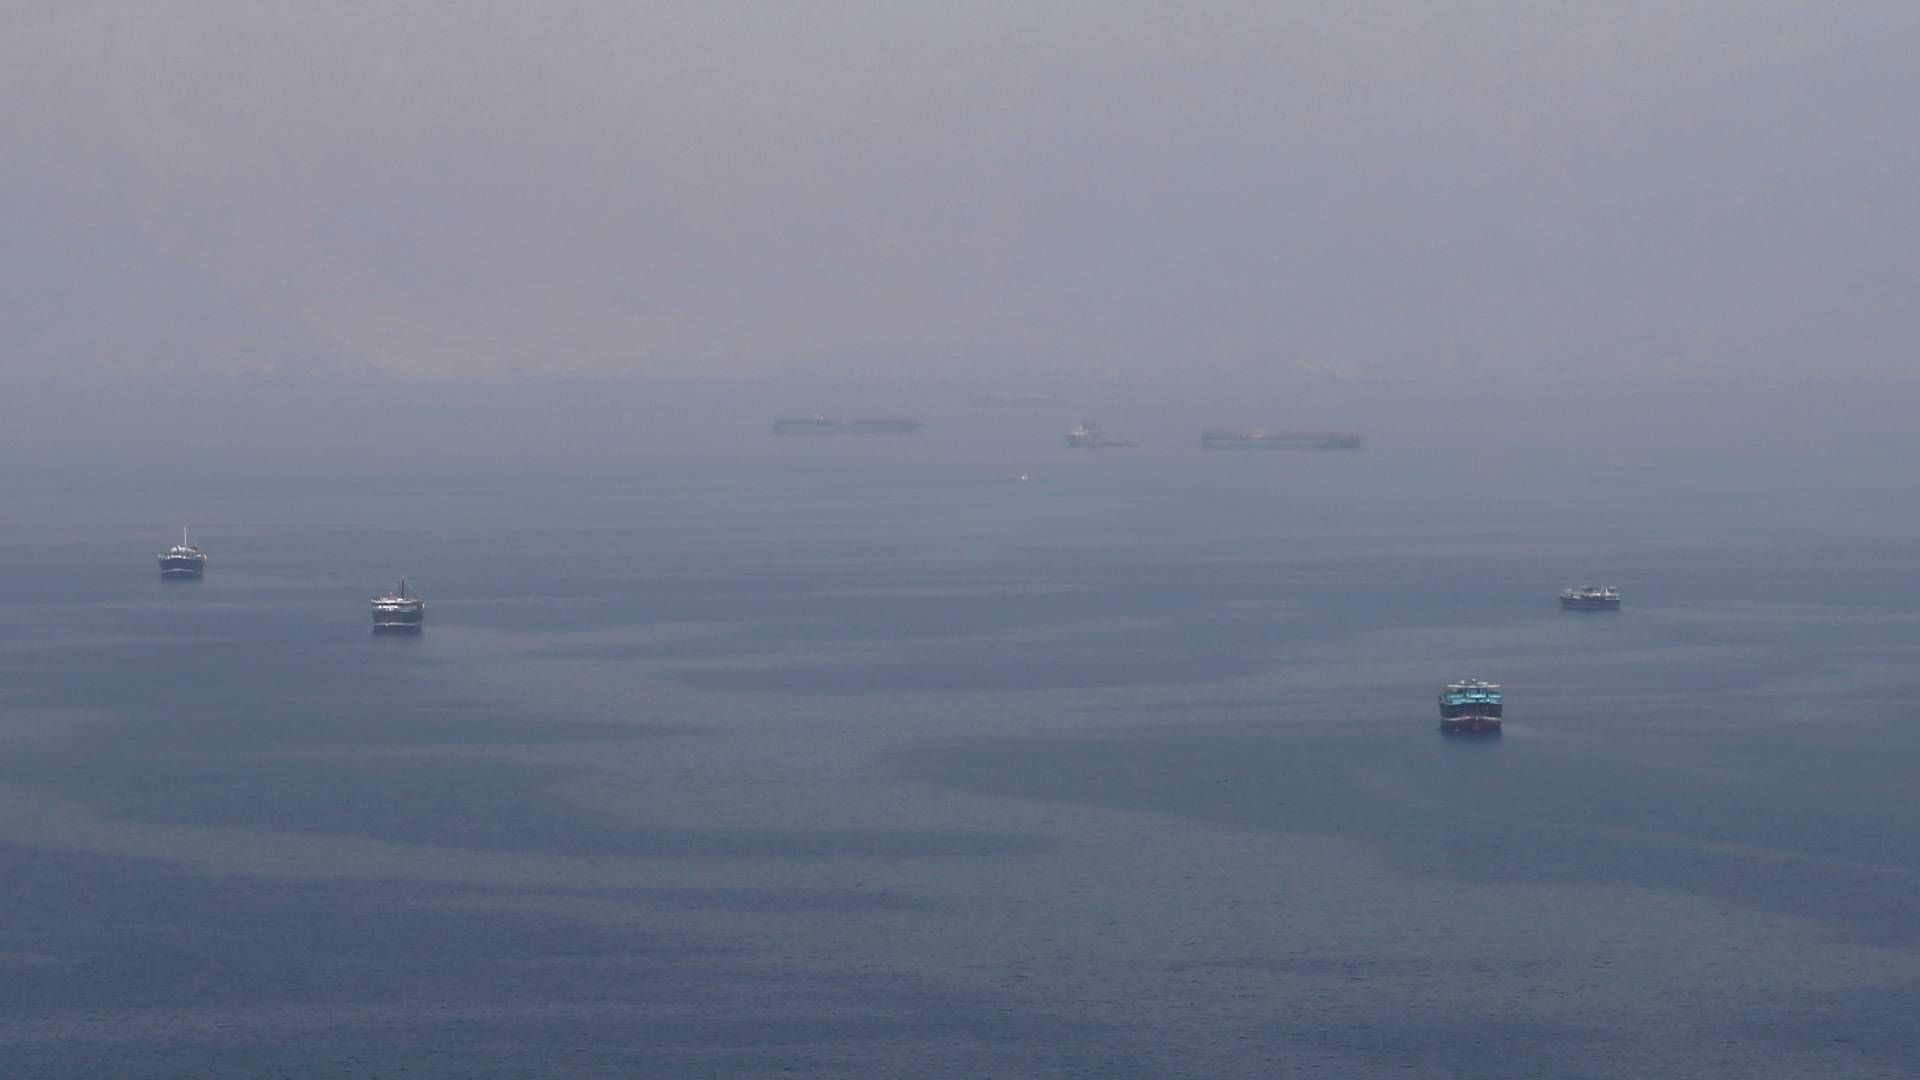 Here you can see container ships in the waters around Musandam in Oman. | Photo: Hamad I Mohammed/Reuters/Ritzau Scanpix